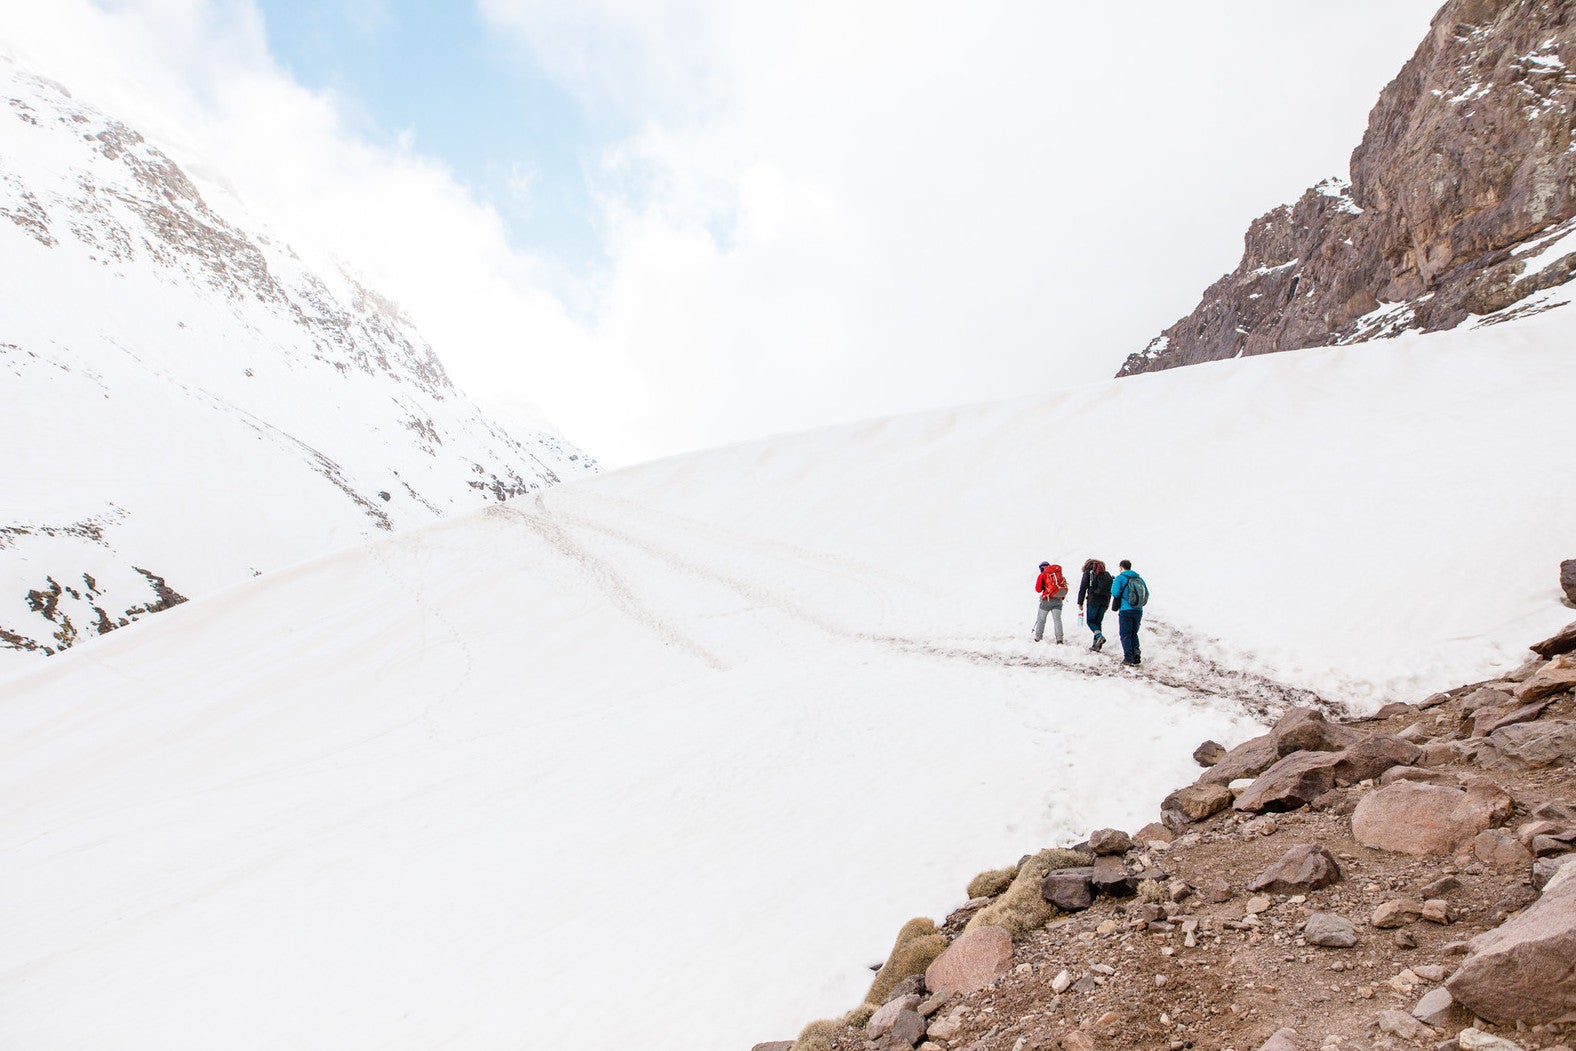 Take on Mount Toubkal in just one weekend